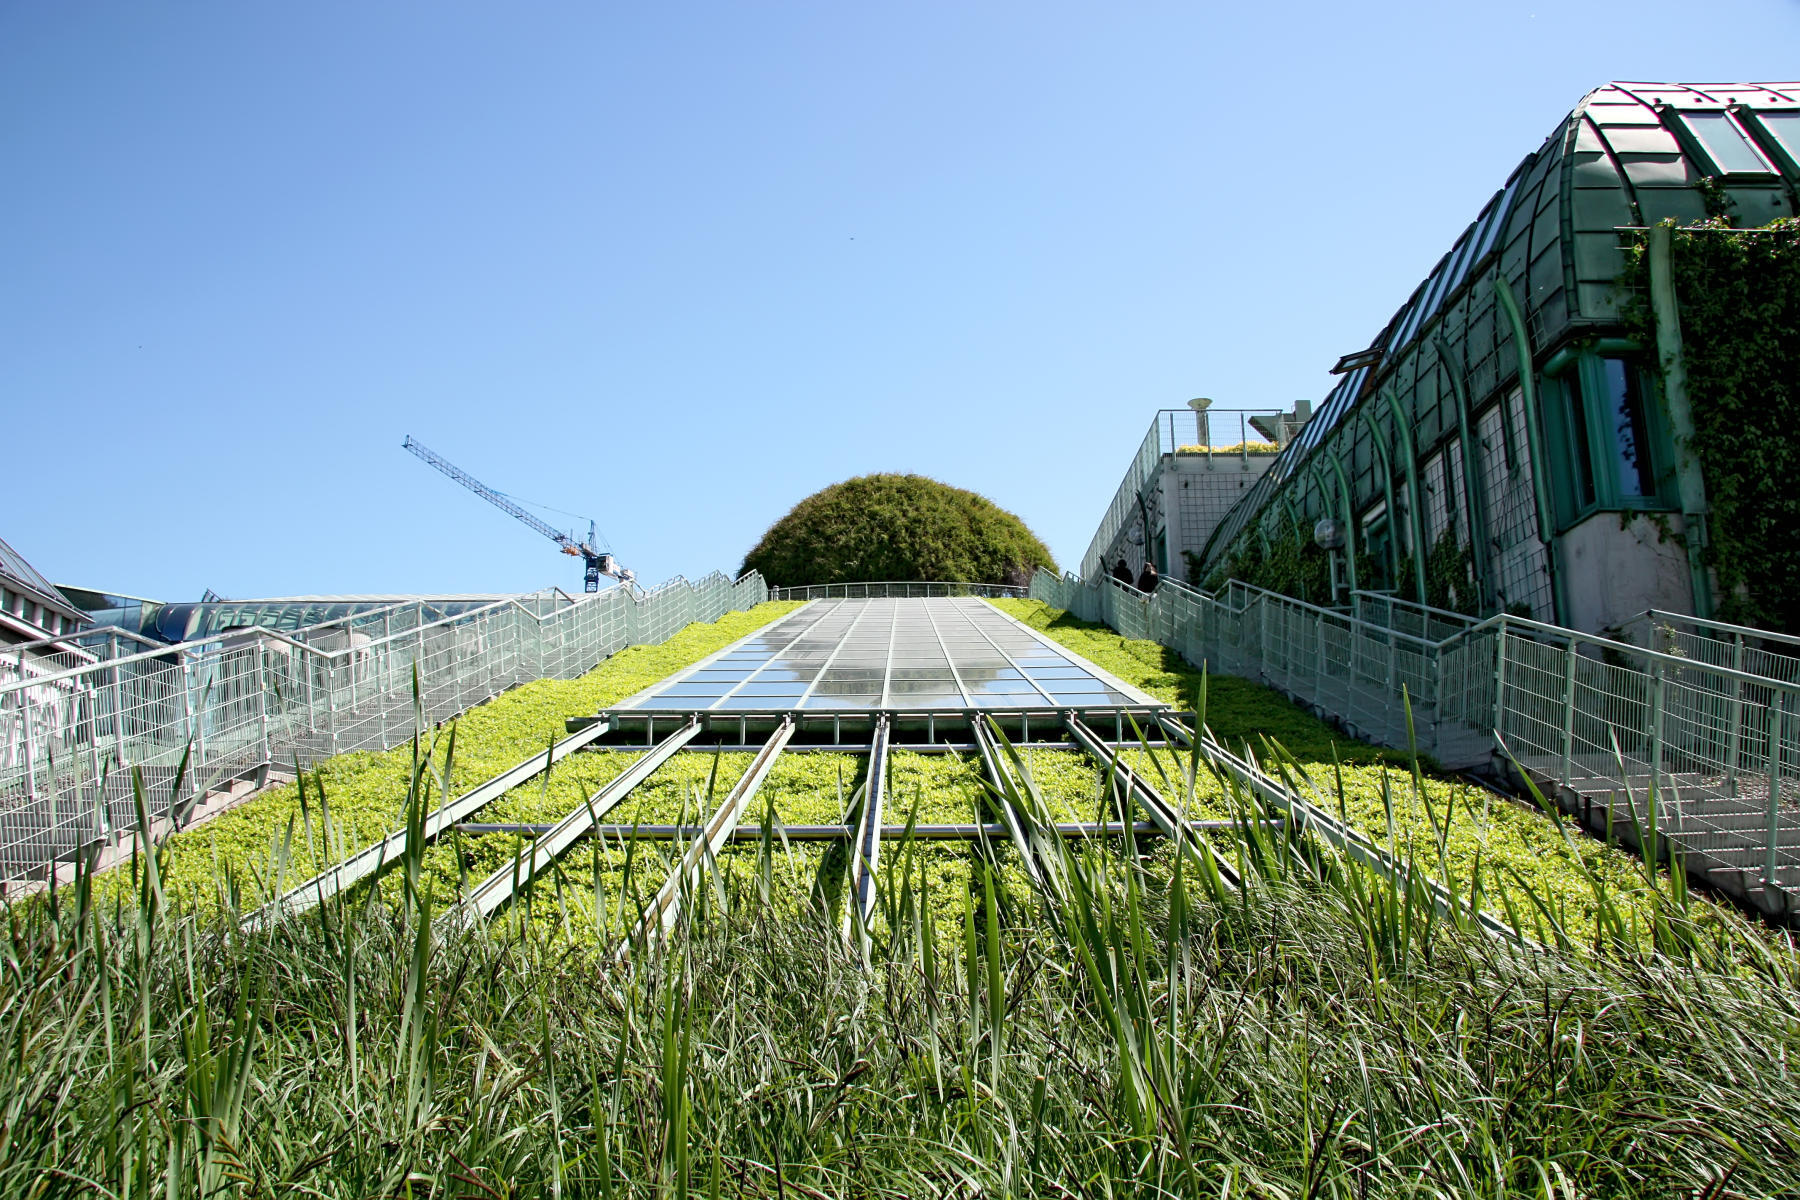 Green roofs shade impervious materials such as bricks and concrete, which reduces heat absorption and provides natural cooling.